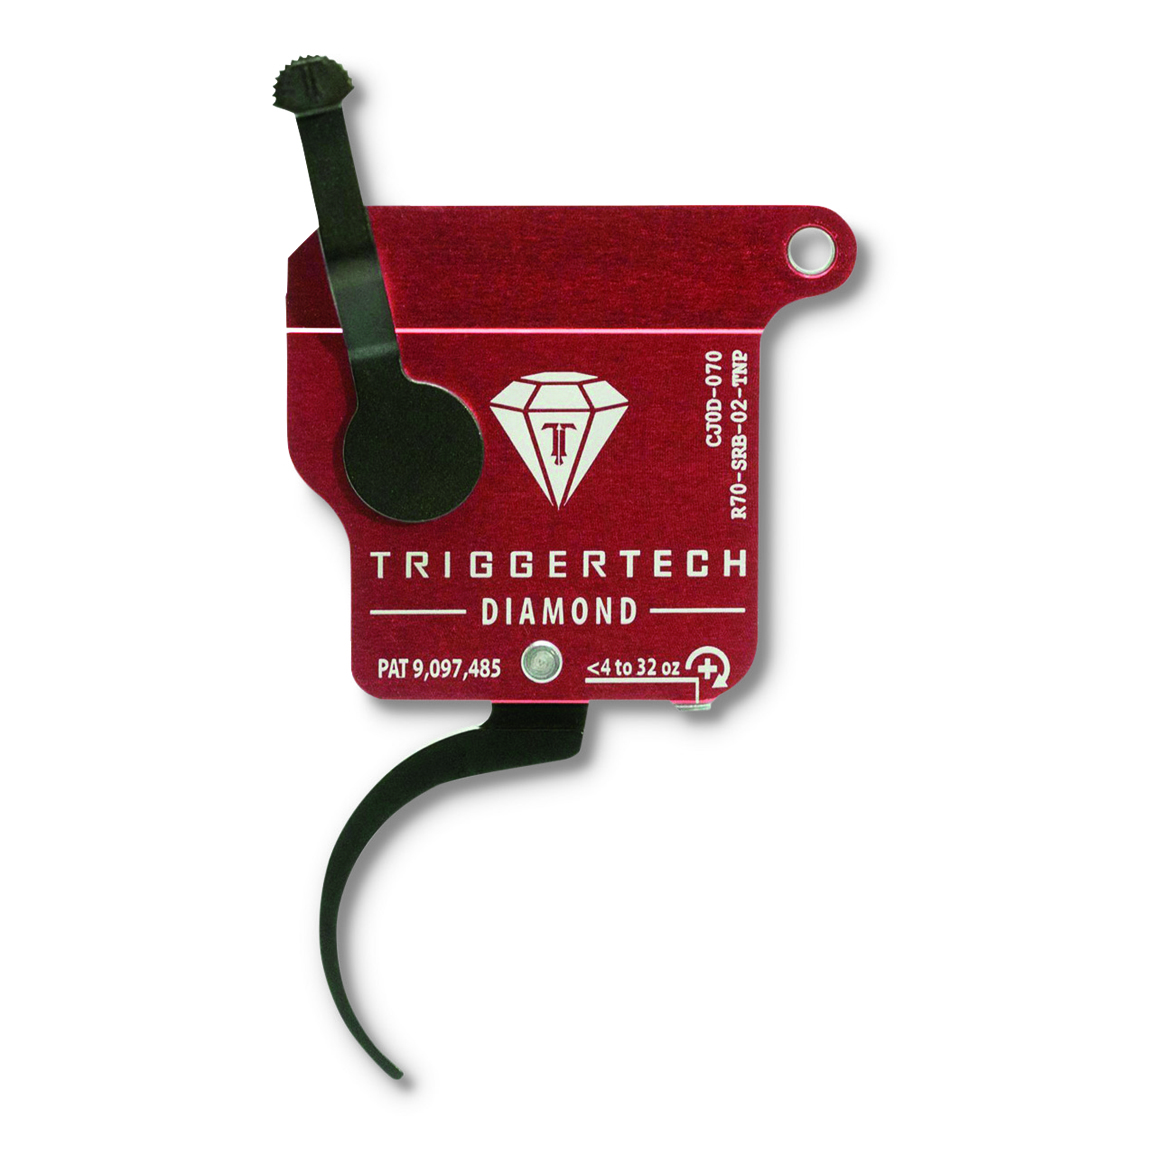 TriggerTech Remington 700 Diamond Single-Stage Pro Curved Trigger, Right Hand, No Bolt Rel.